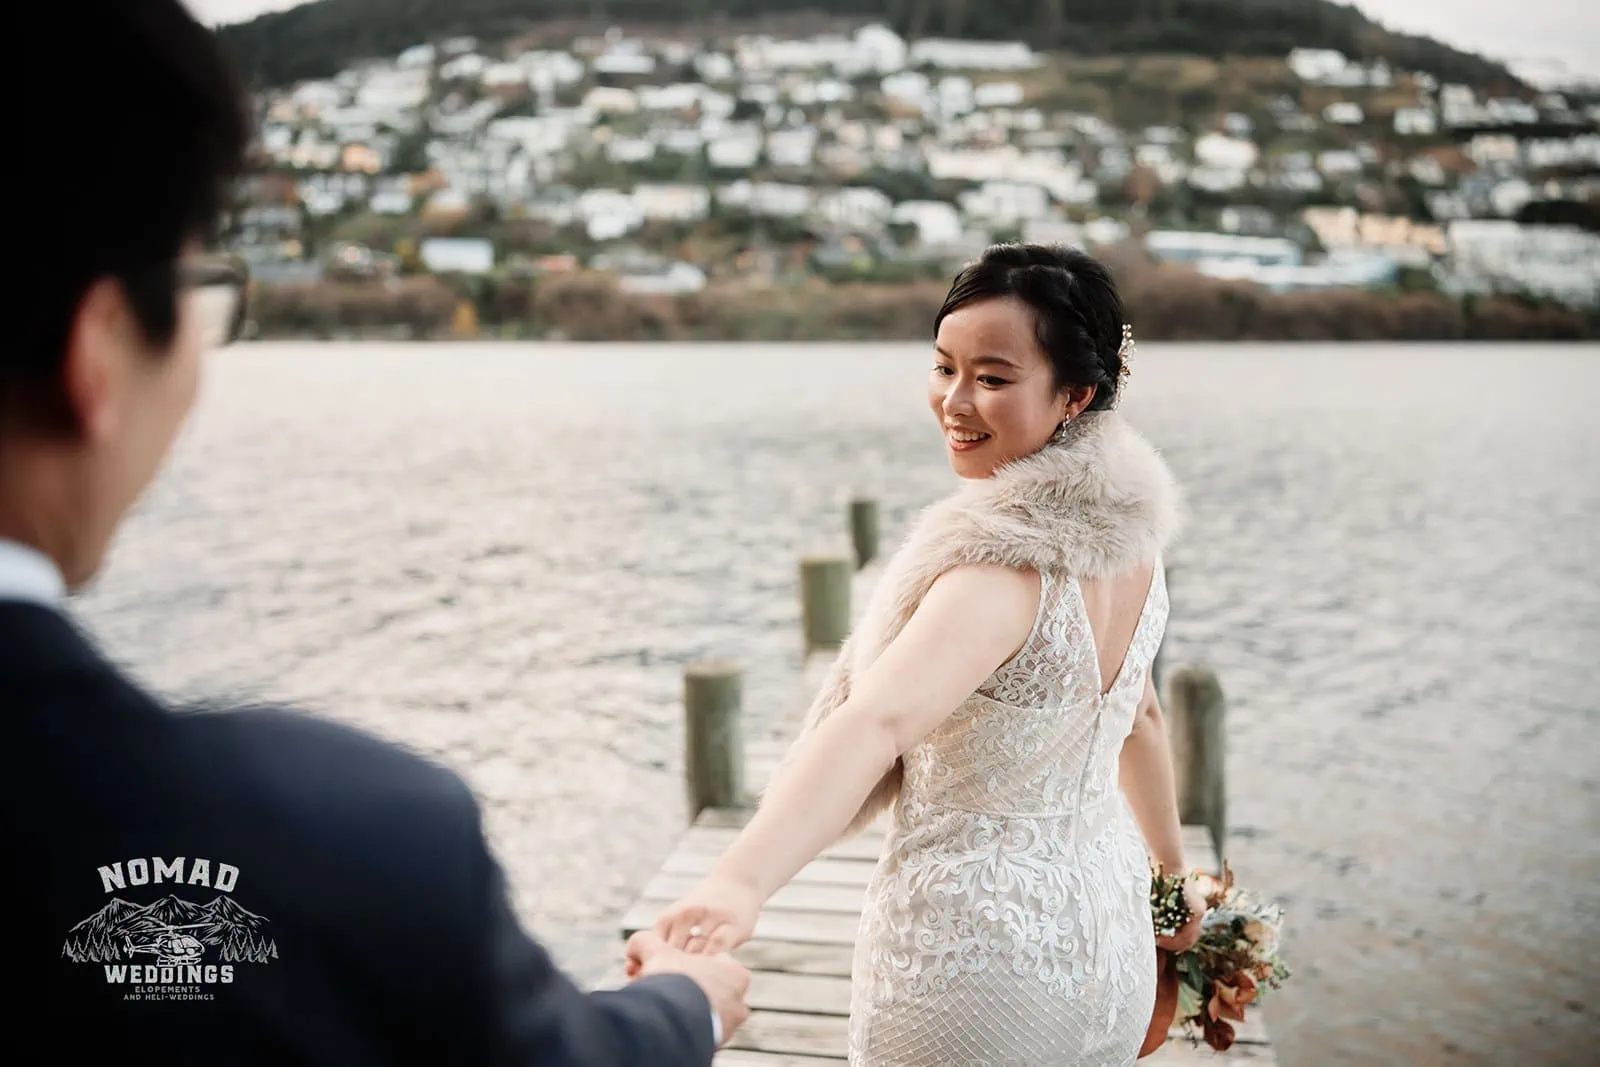 Joanna and Tony, a bride and groom, embrace on a dock during their pre-wedding shoot in Queenstown, New Zealand.